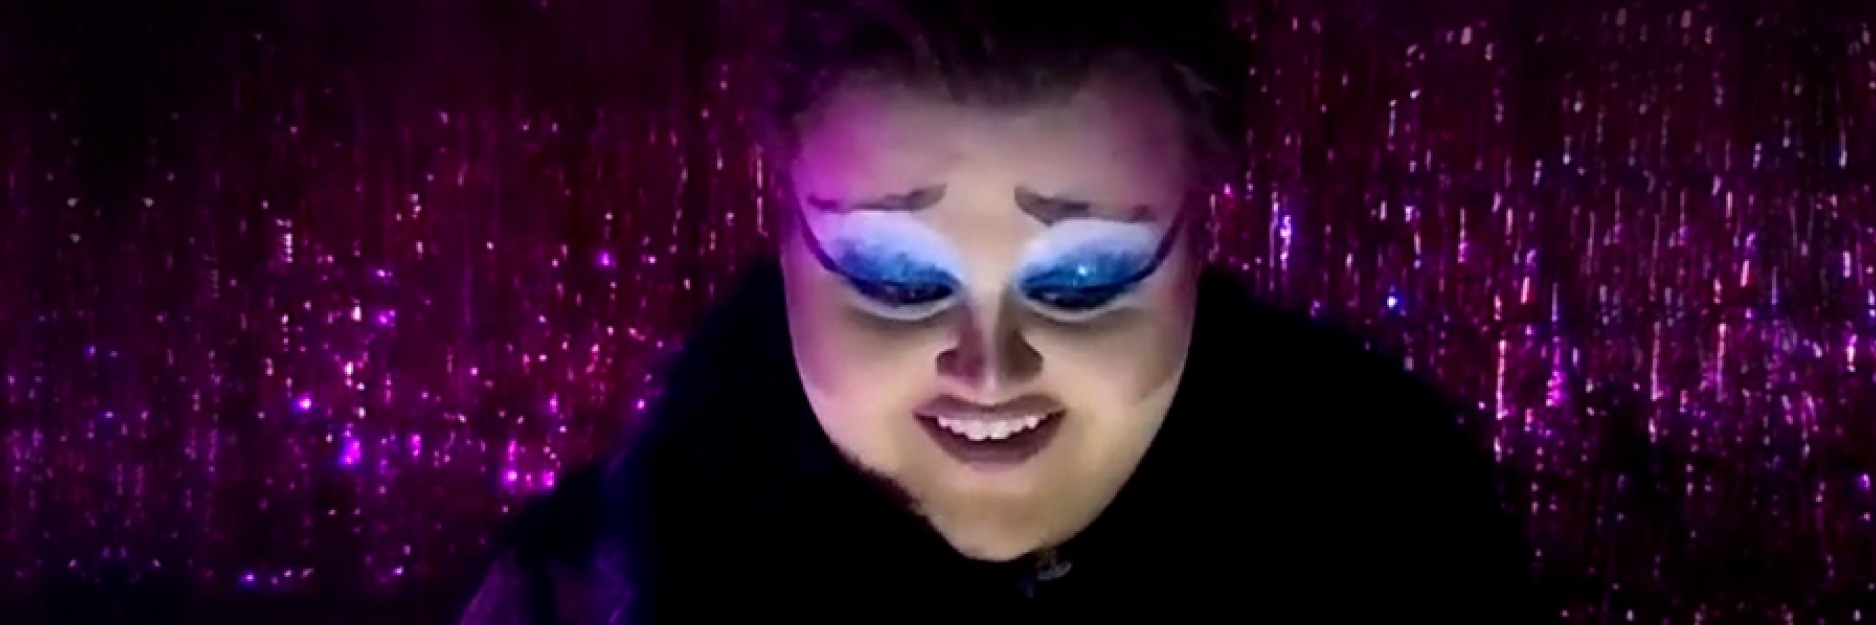 a woman in heavy theatrical makeup in front of a sparkly pink background